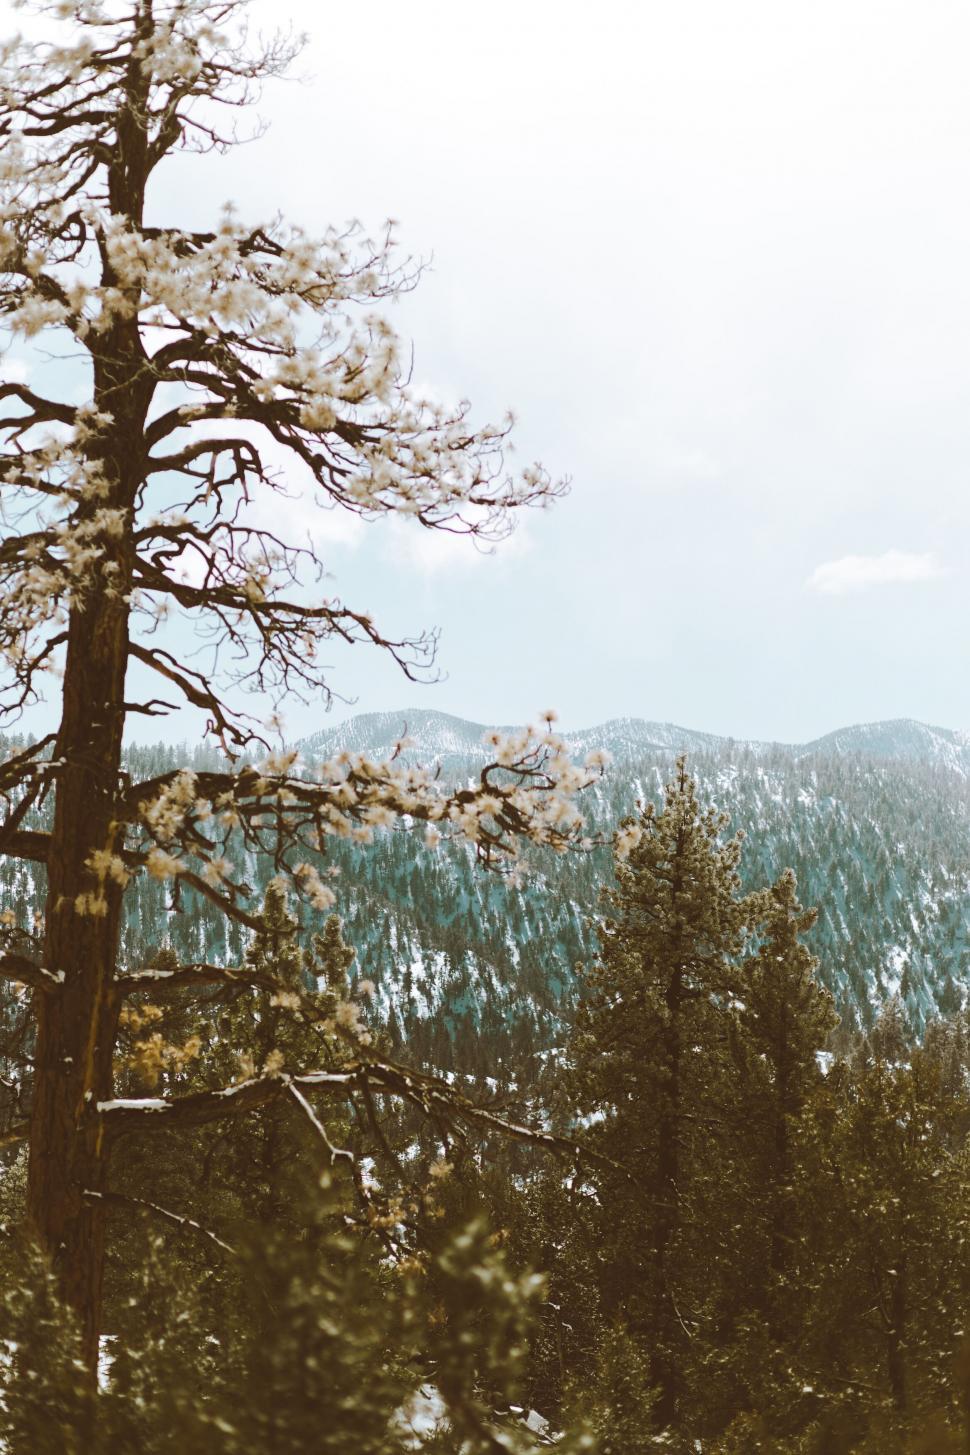 Free Image of Snow-dusted pine trees in mountainous terrain 